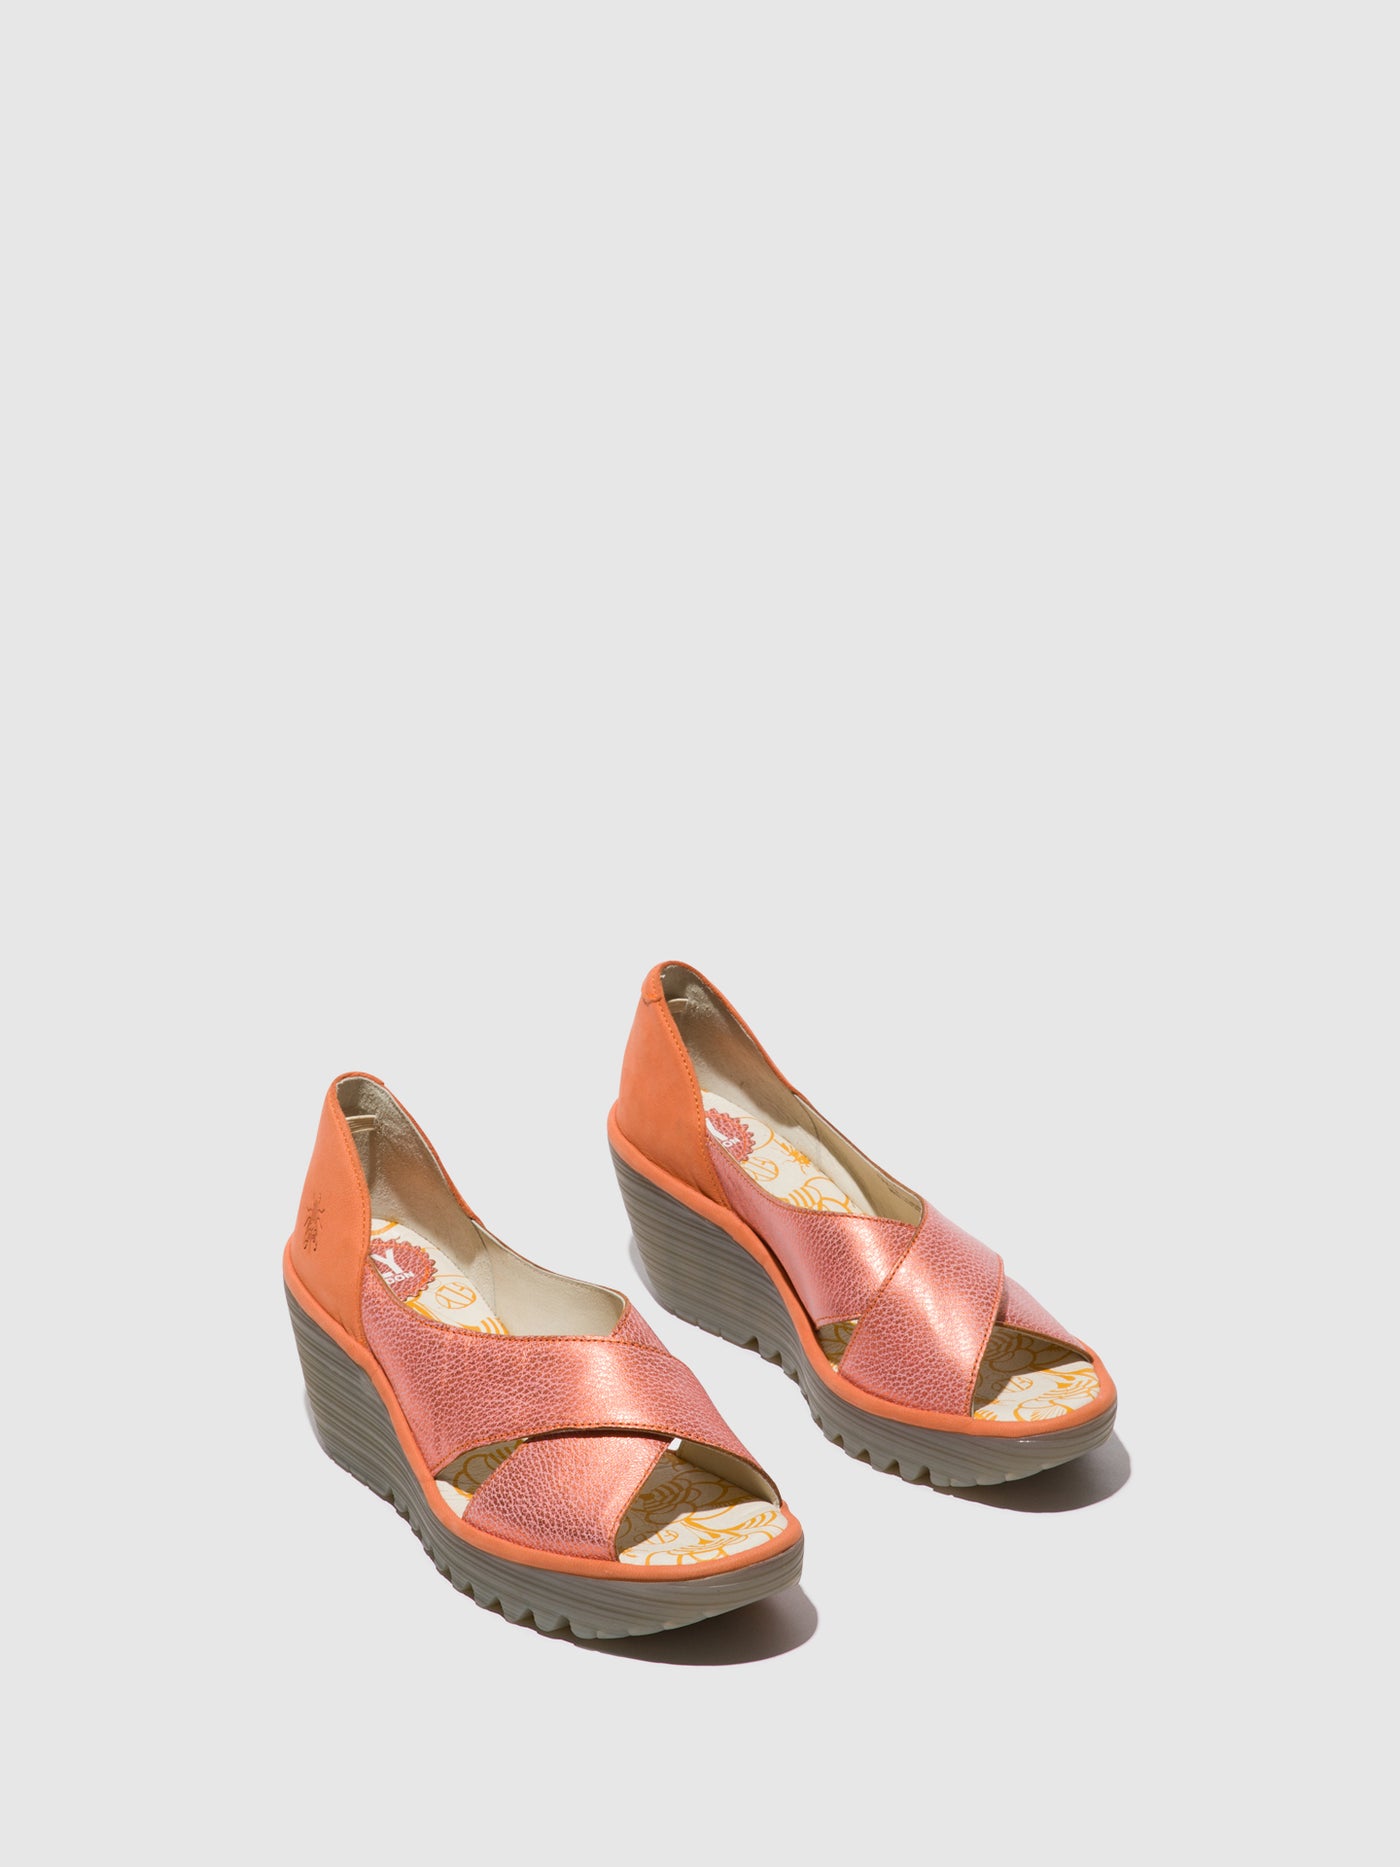 Crossover Sandals YOMA307FLY SALMON/PEACH